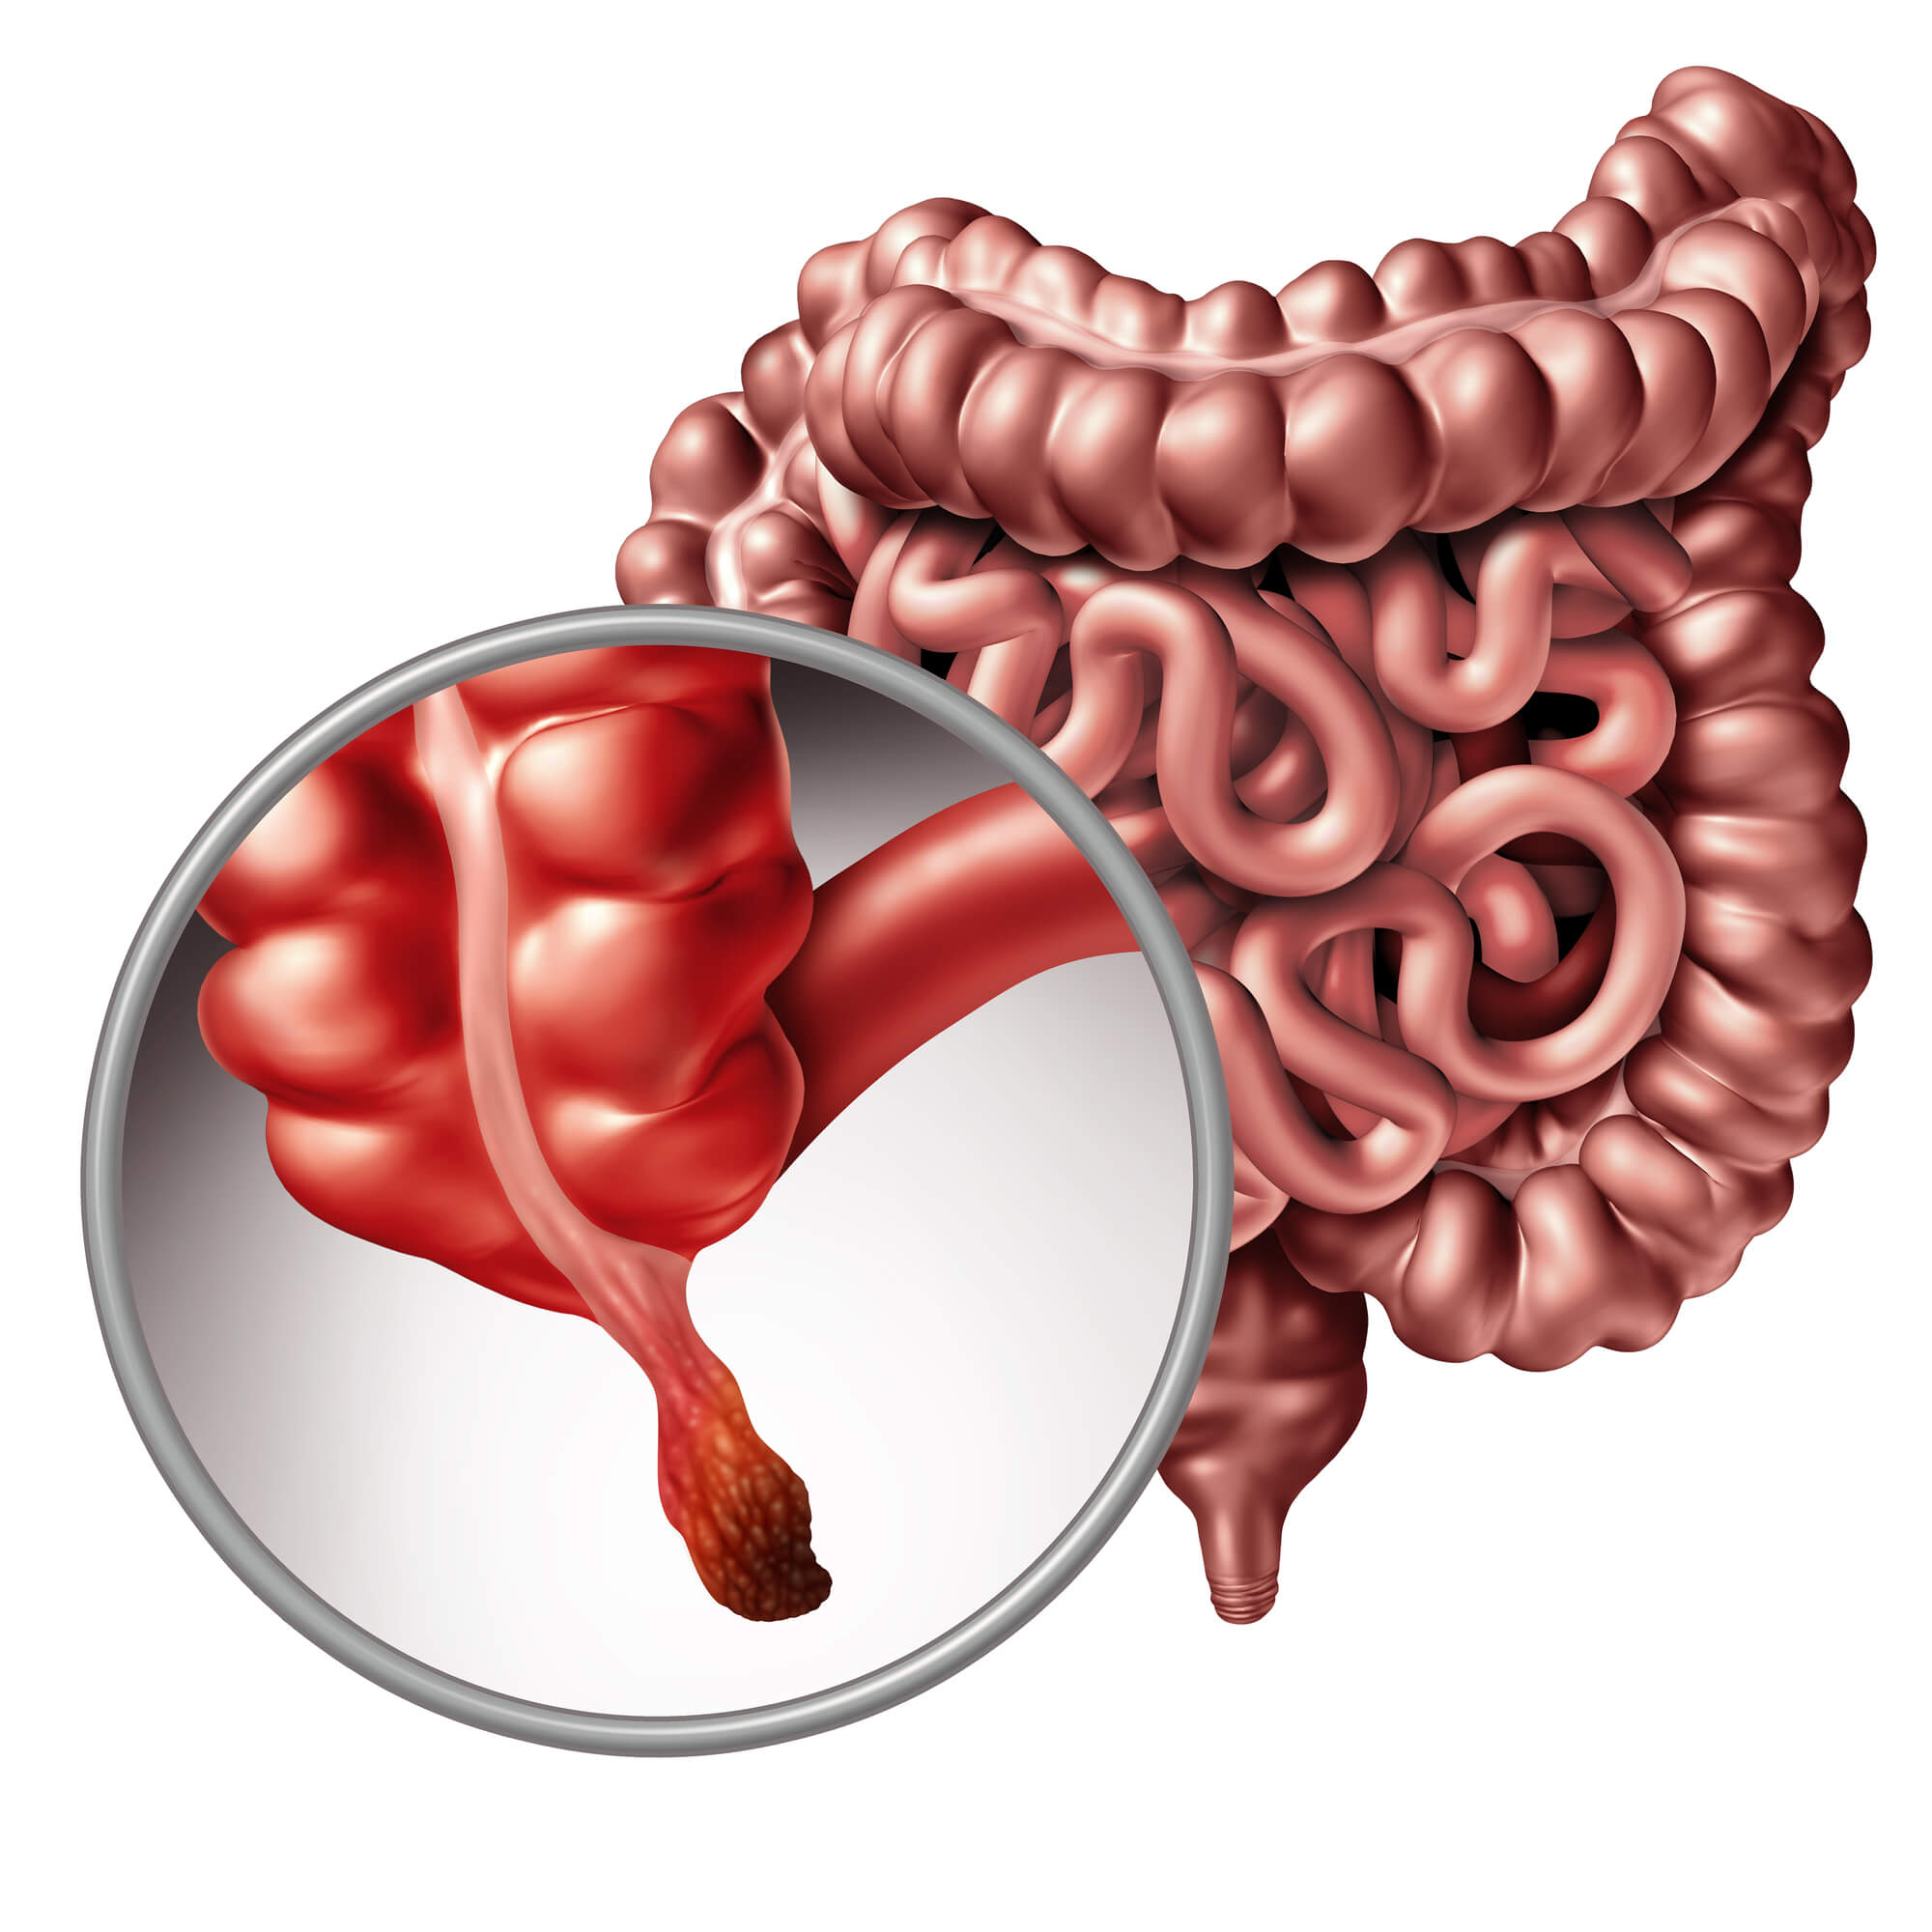 The location of the appendix in the digestive system. Image: depositphotos.com